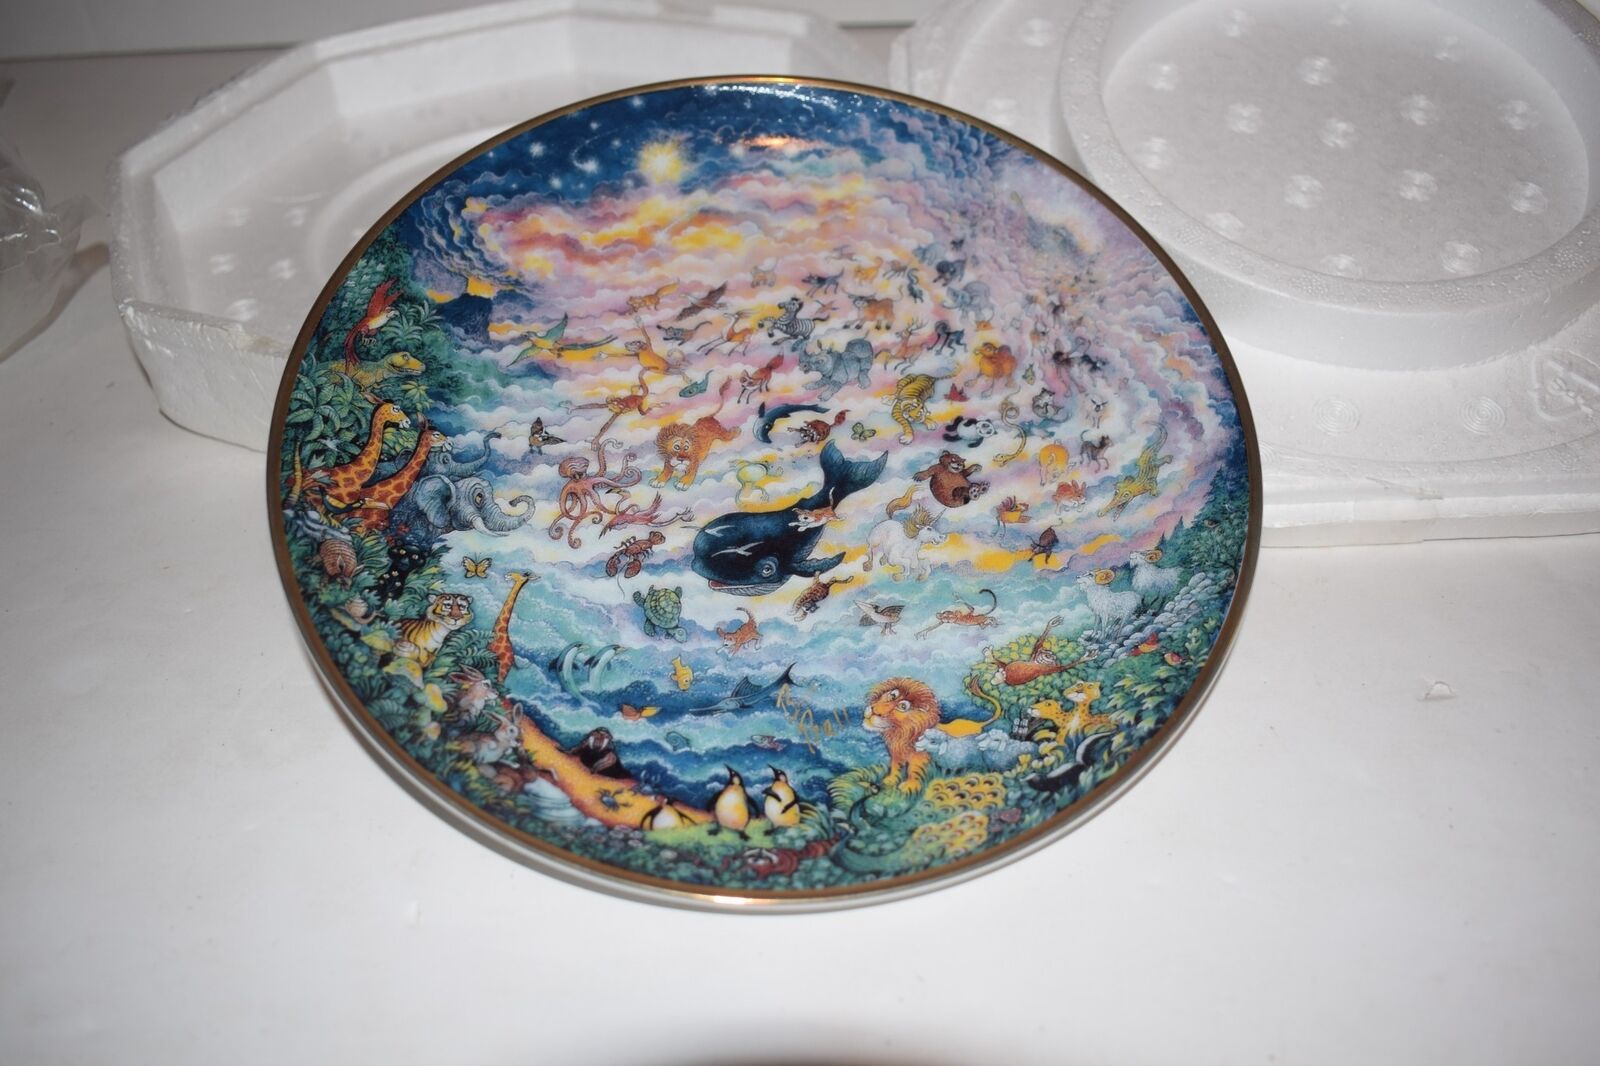 IN THE BEGINNING-1990 Franklin Mint LE Plate By Bill Bell - SIGNED  (AFI92)